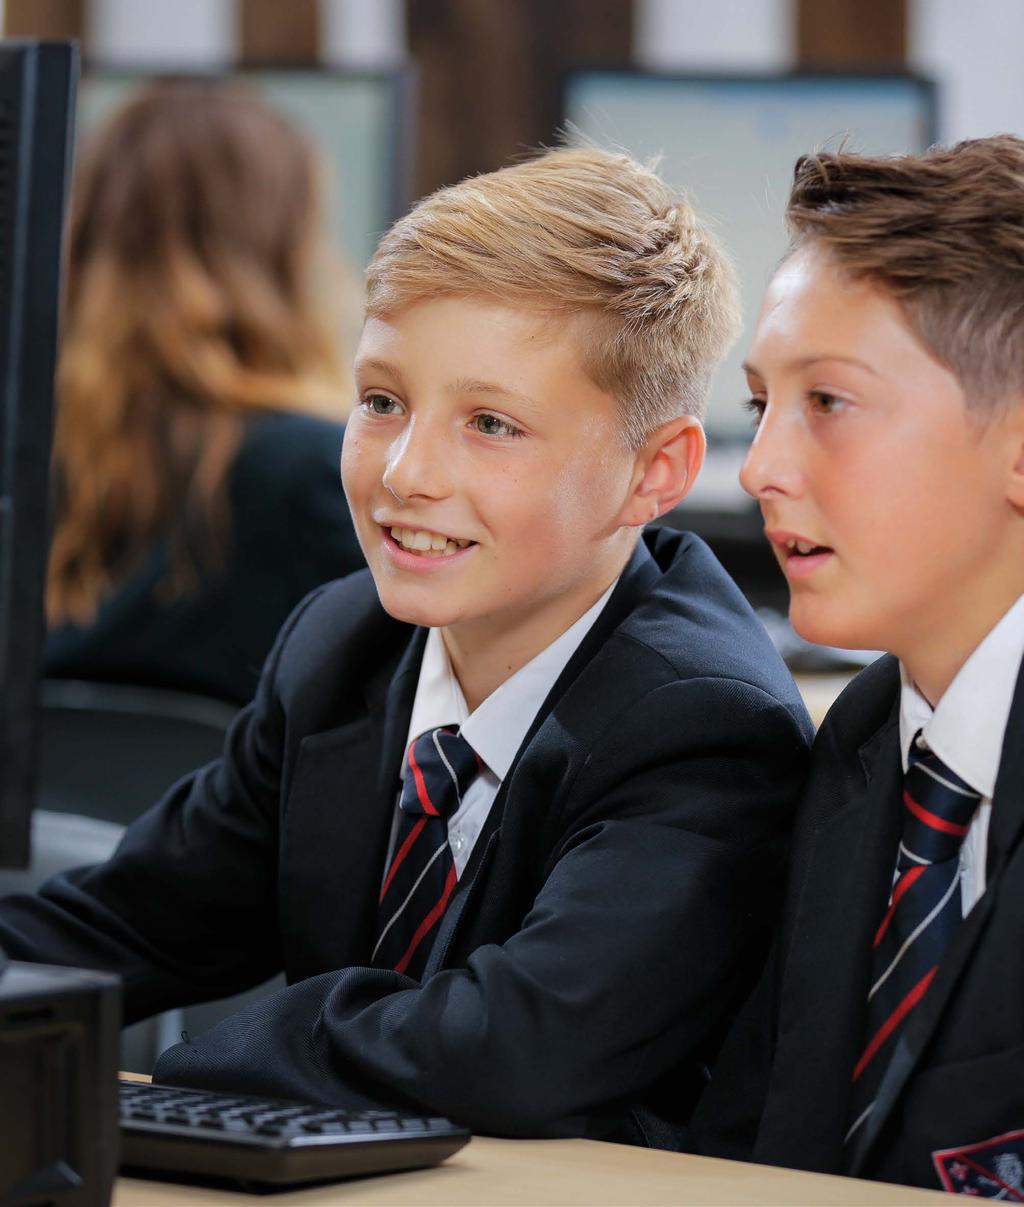 Every Person The Best They Can Be Steyning Grammar School is a thriving comprehensive school situated on the edge of the South Downs National Park.